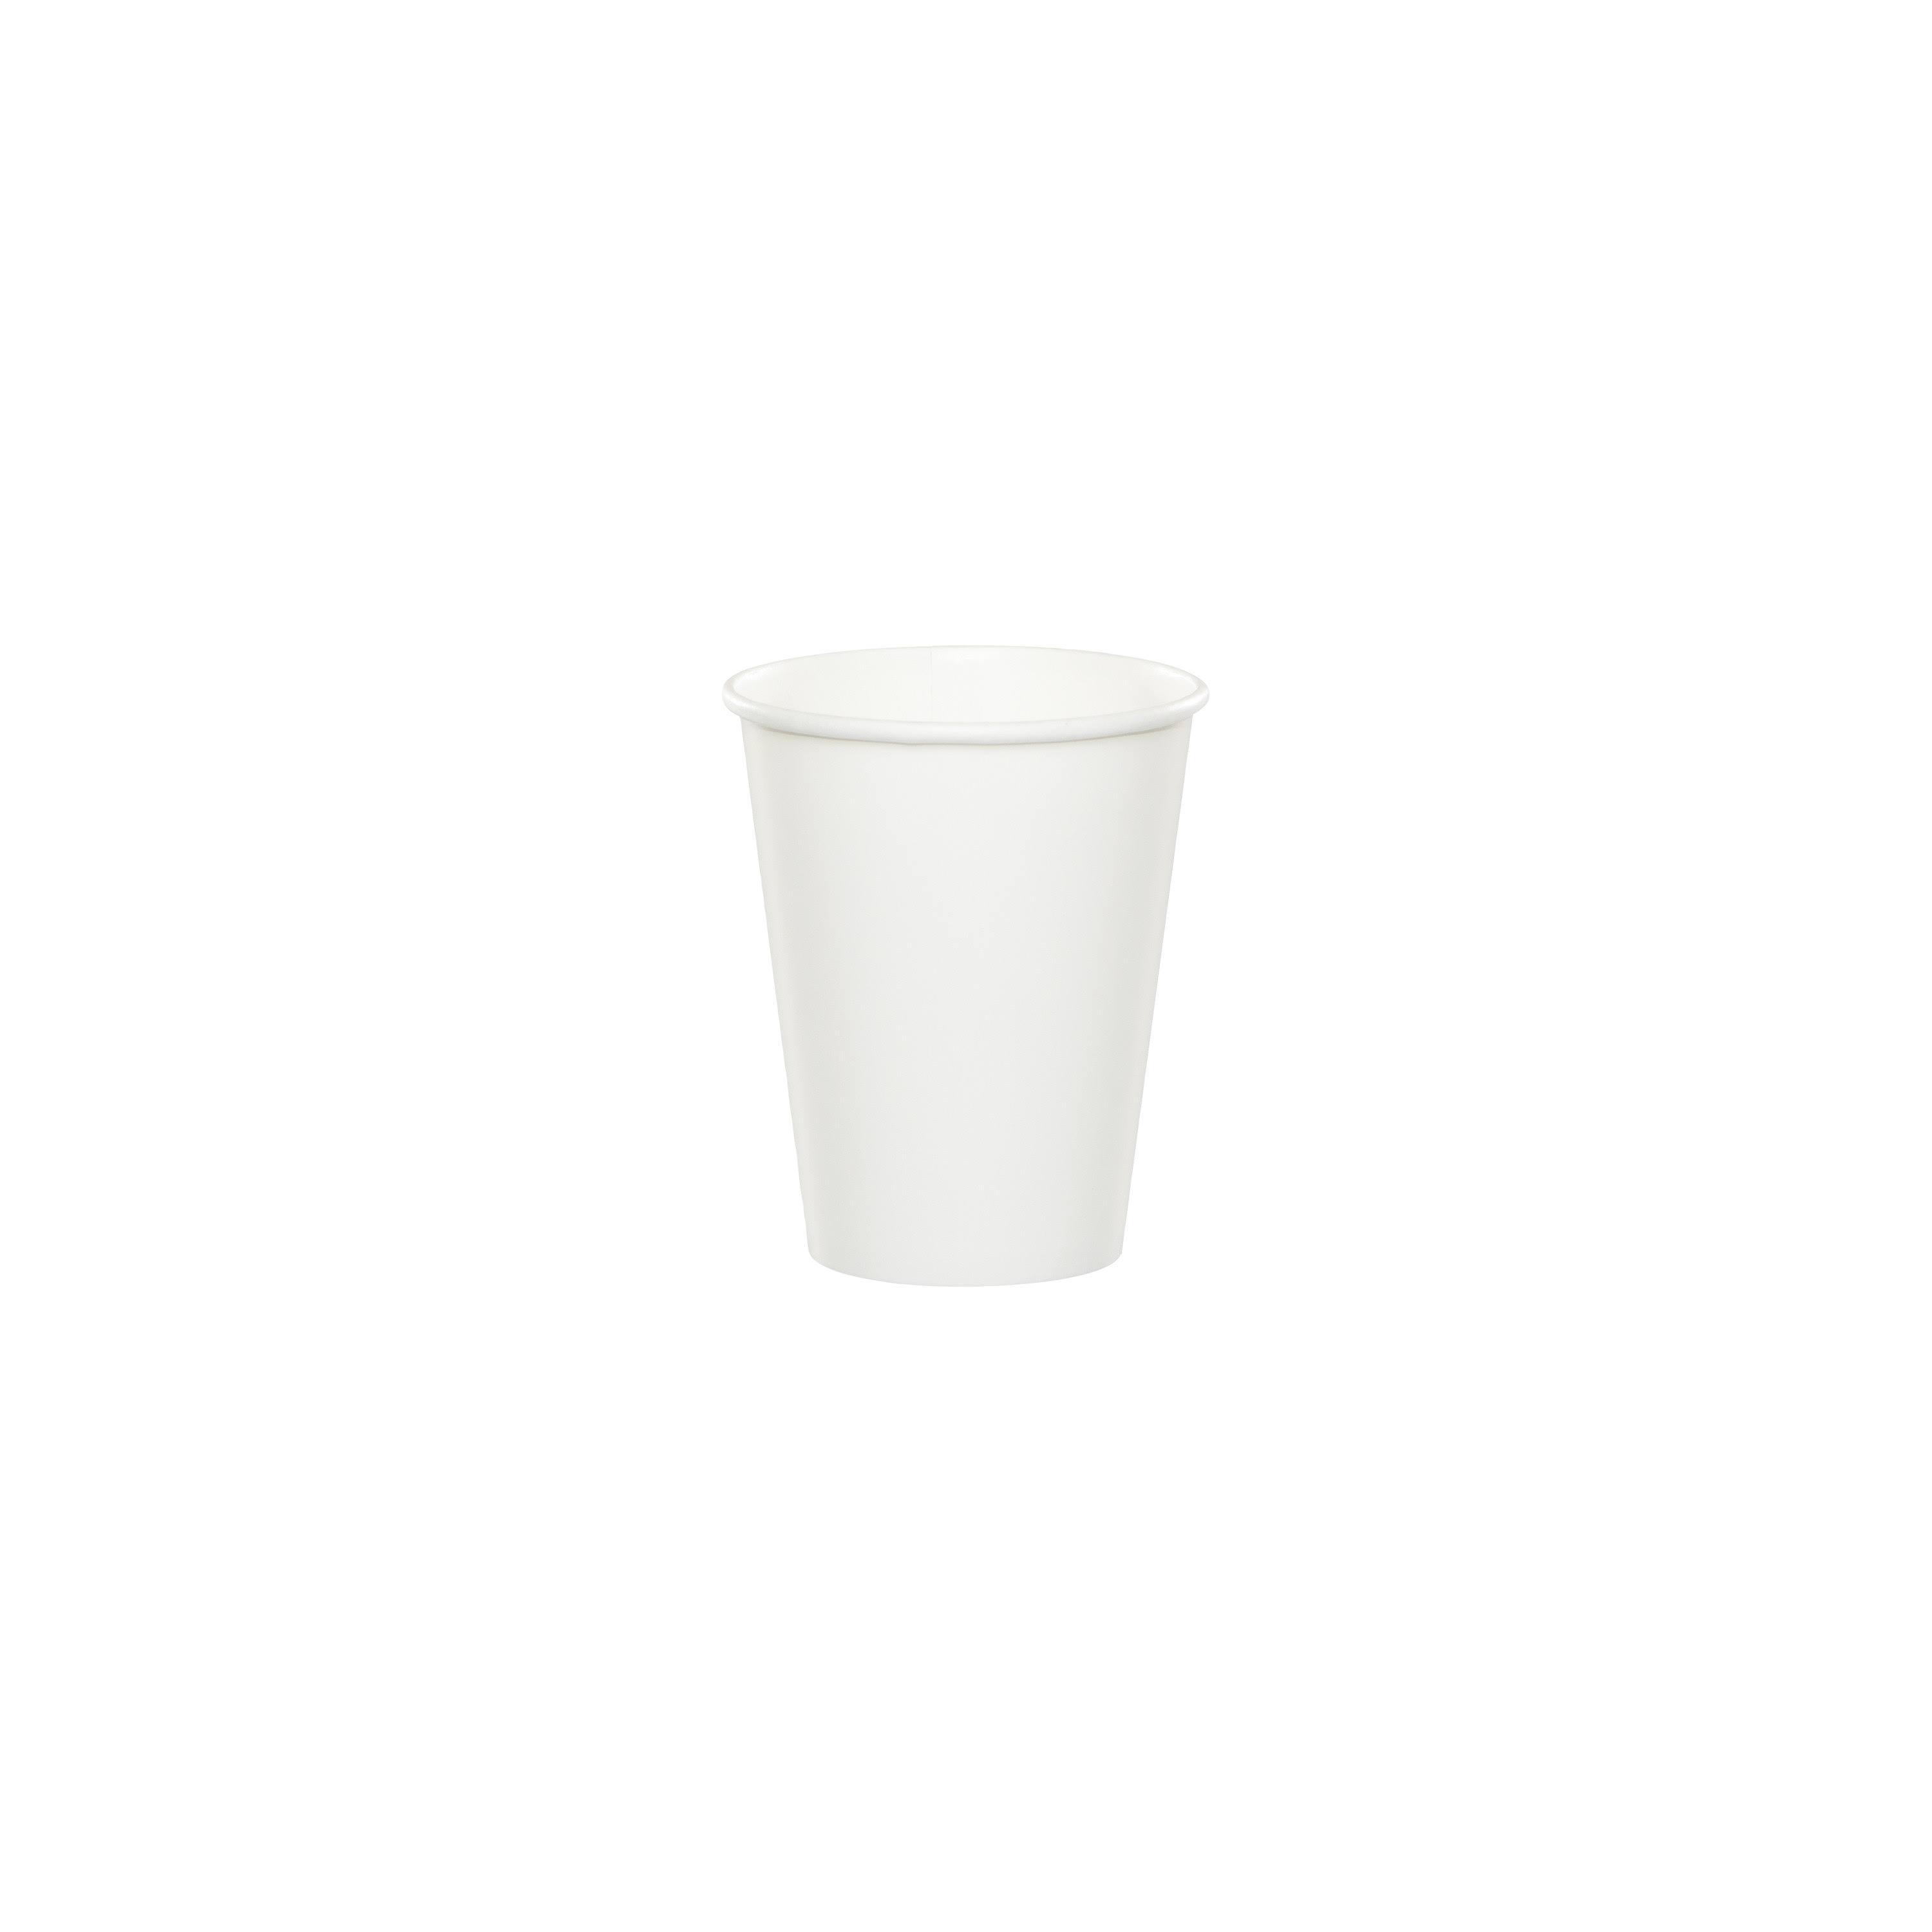 Celebrations Cups, White, 9 Ounce - 8 cups